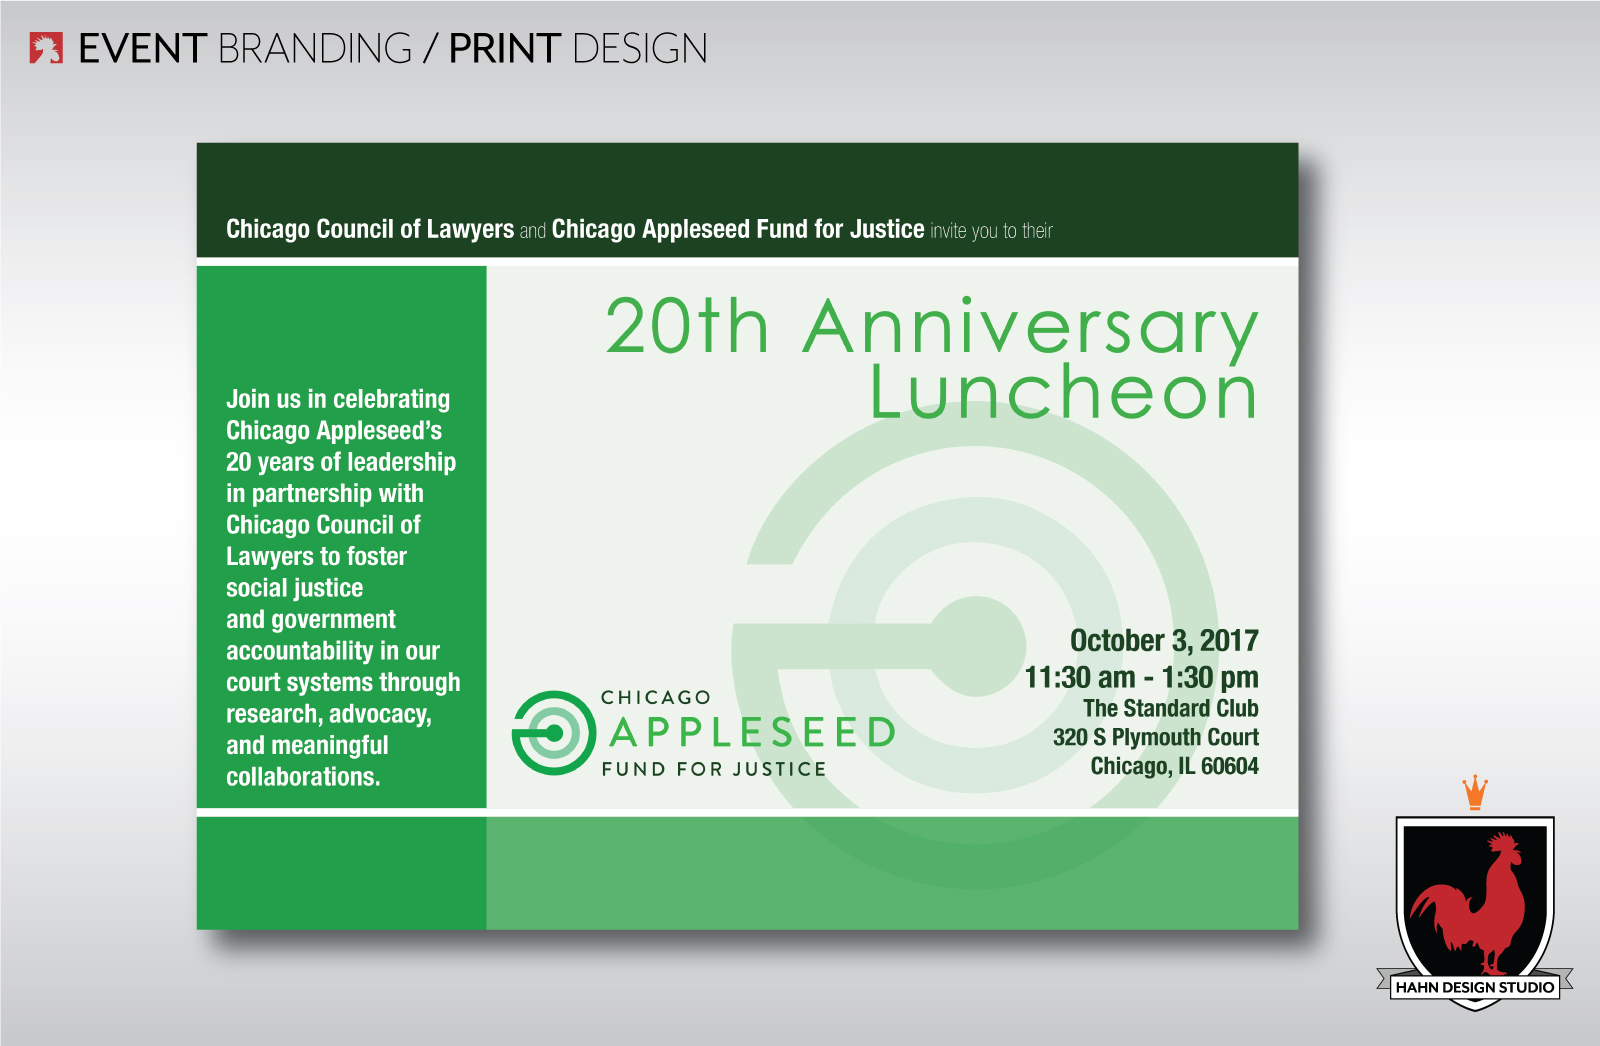 Event Branding & Print Design for the Chicago Appleseed 20th Anniversary Luncheon